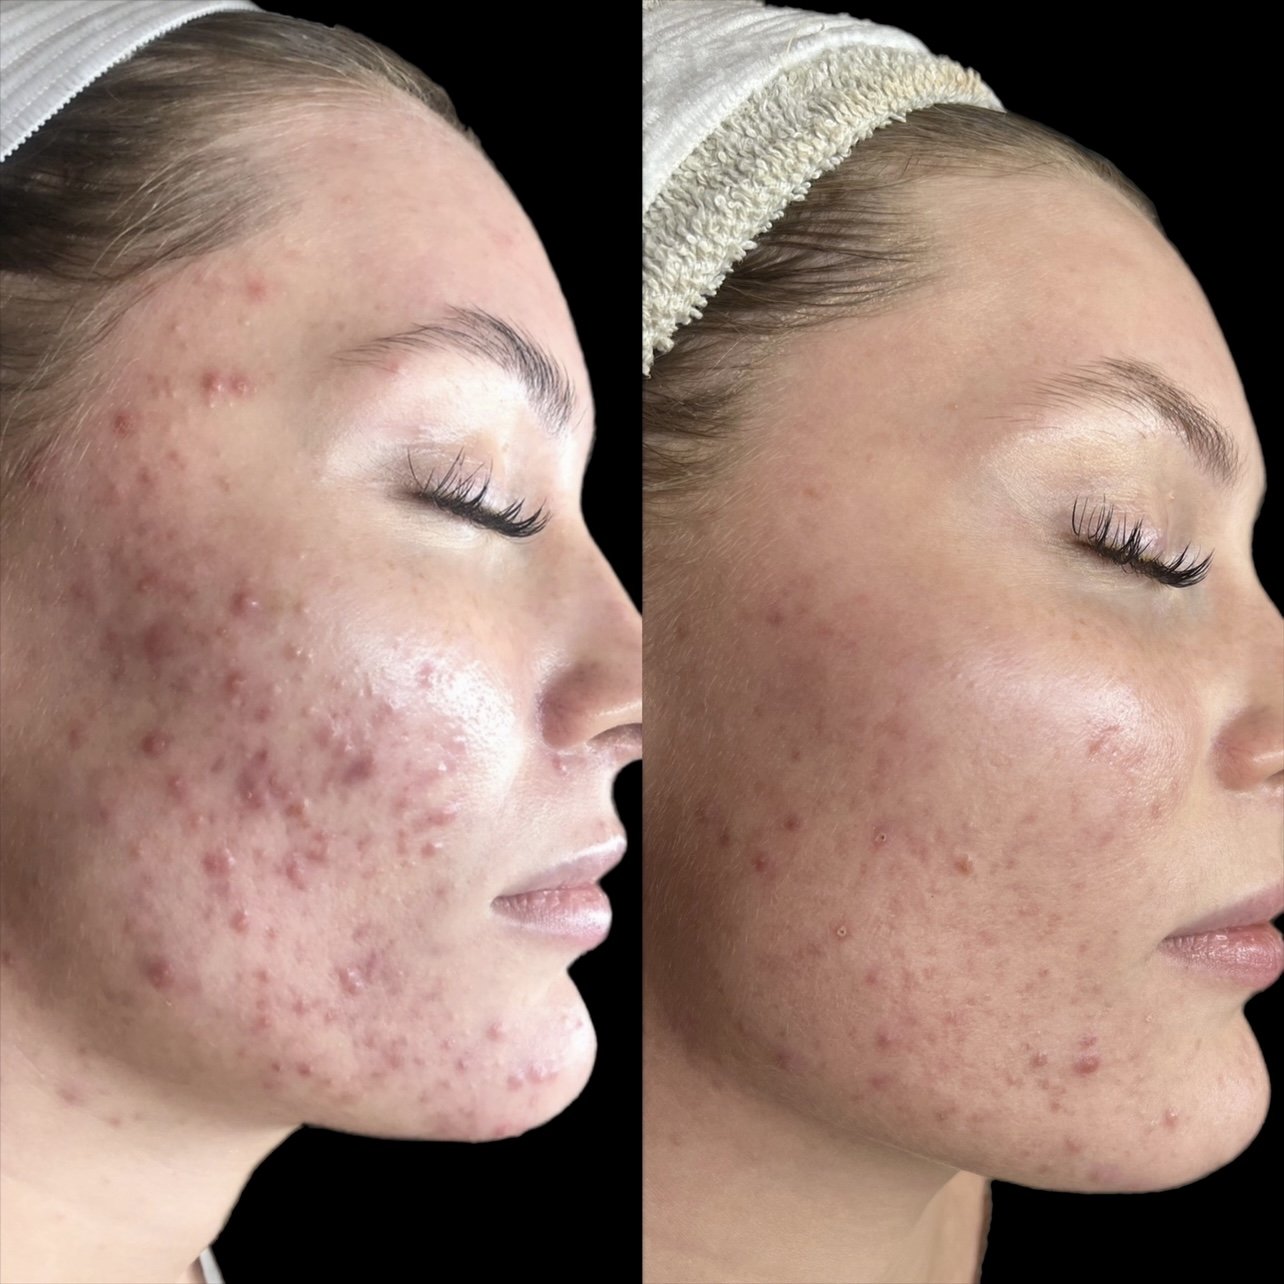 acne-clearing-results-knoxville.jpg